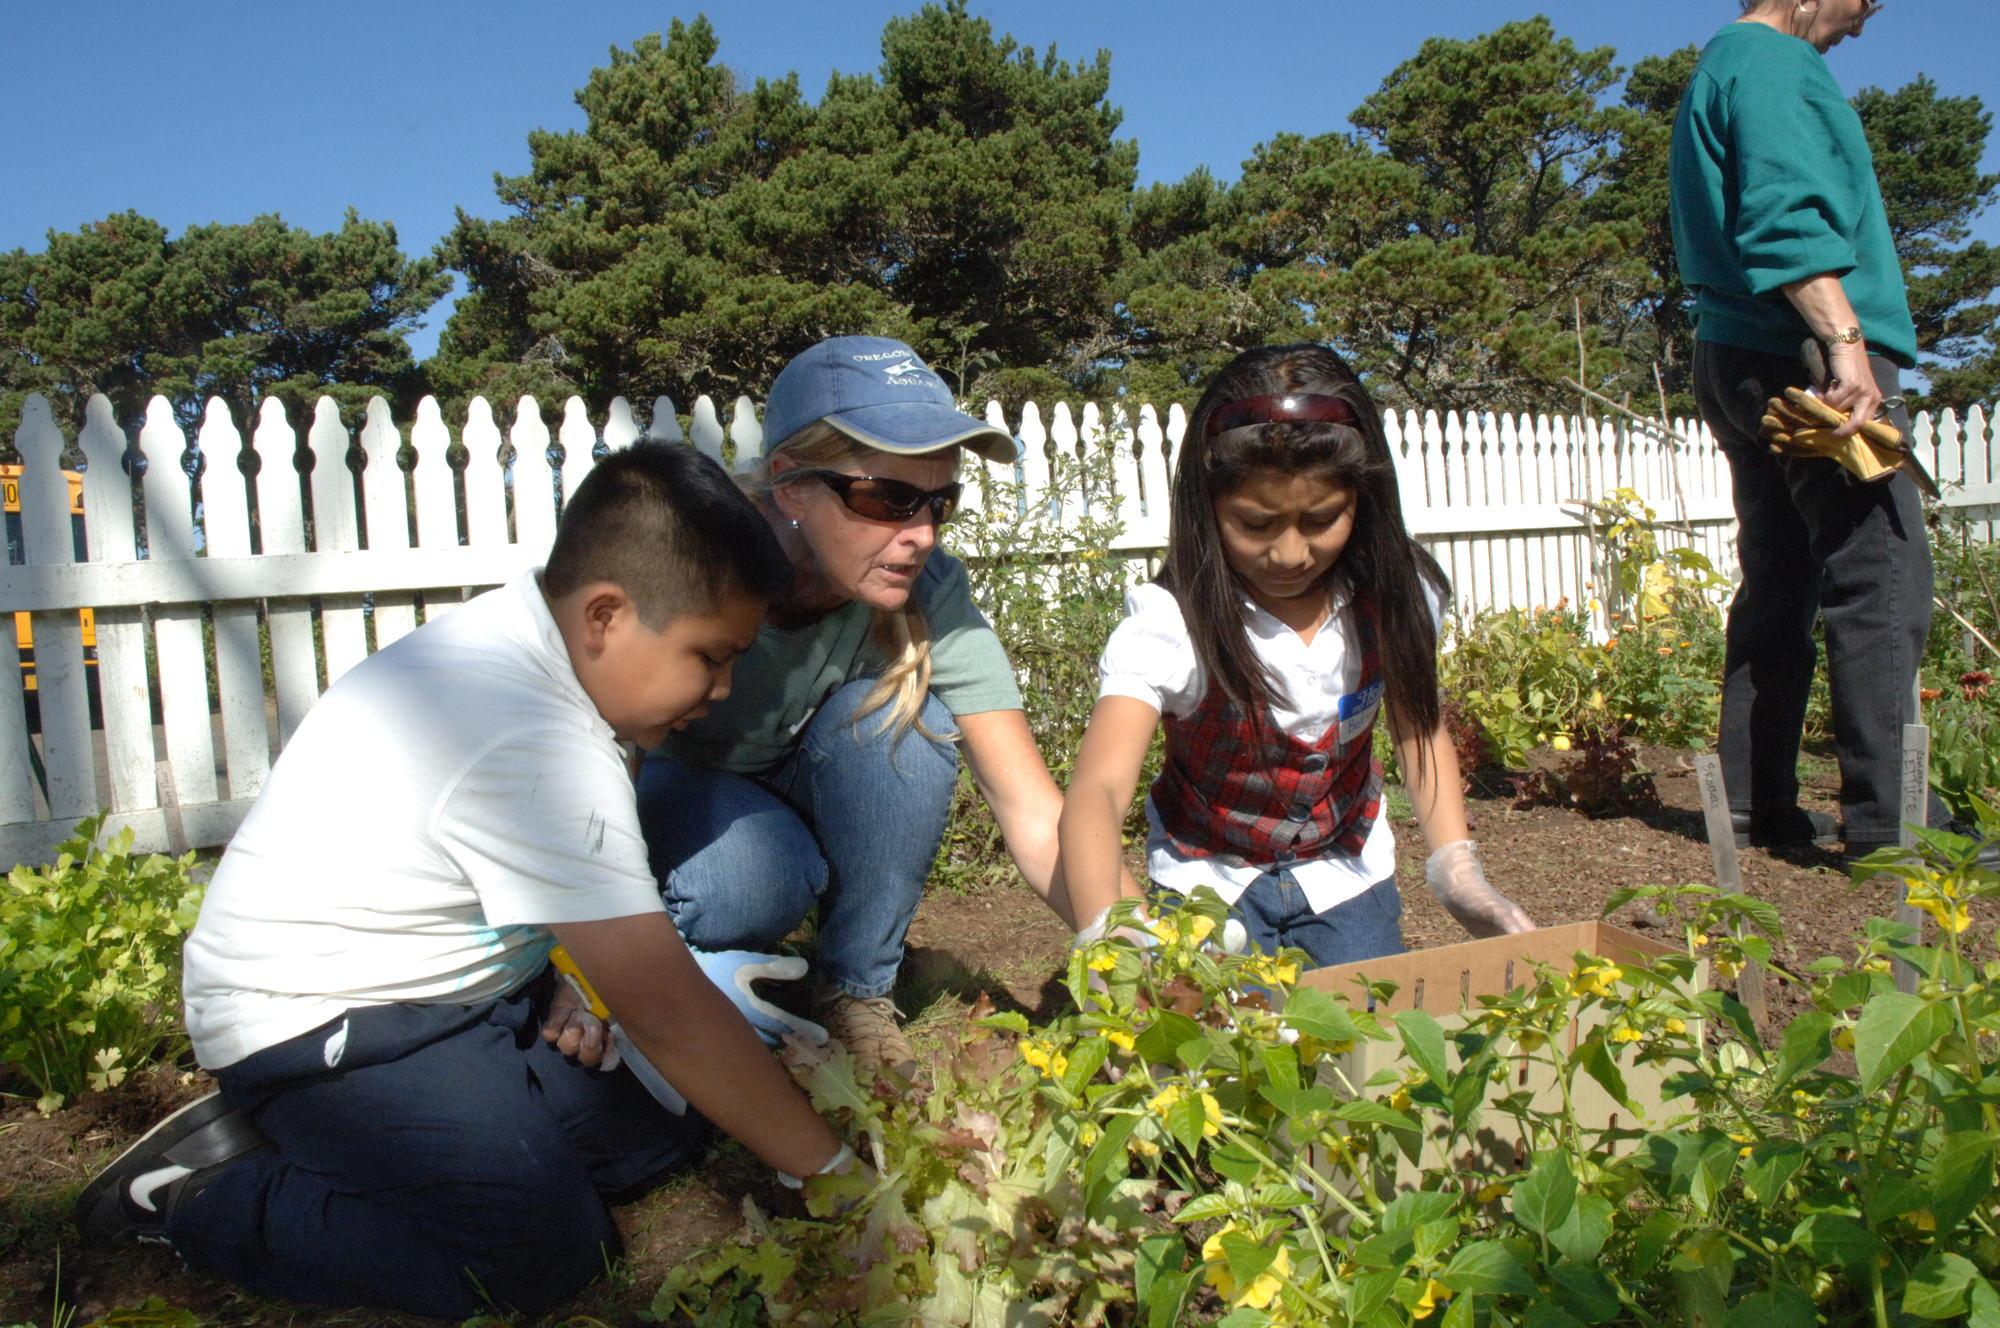 An adult and two kids working in a garden